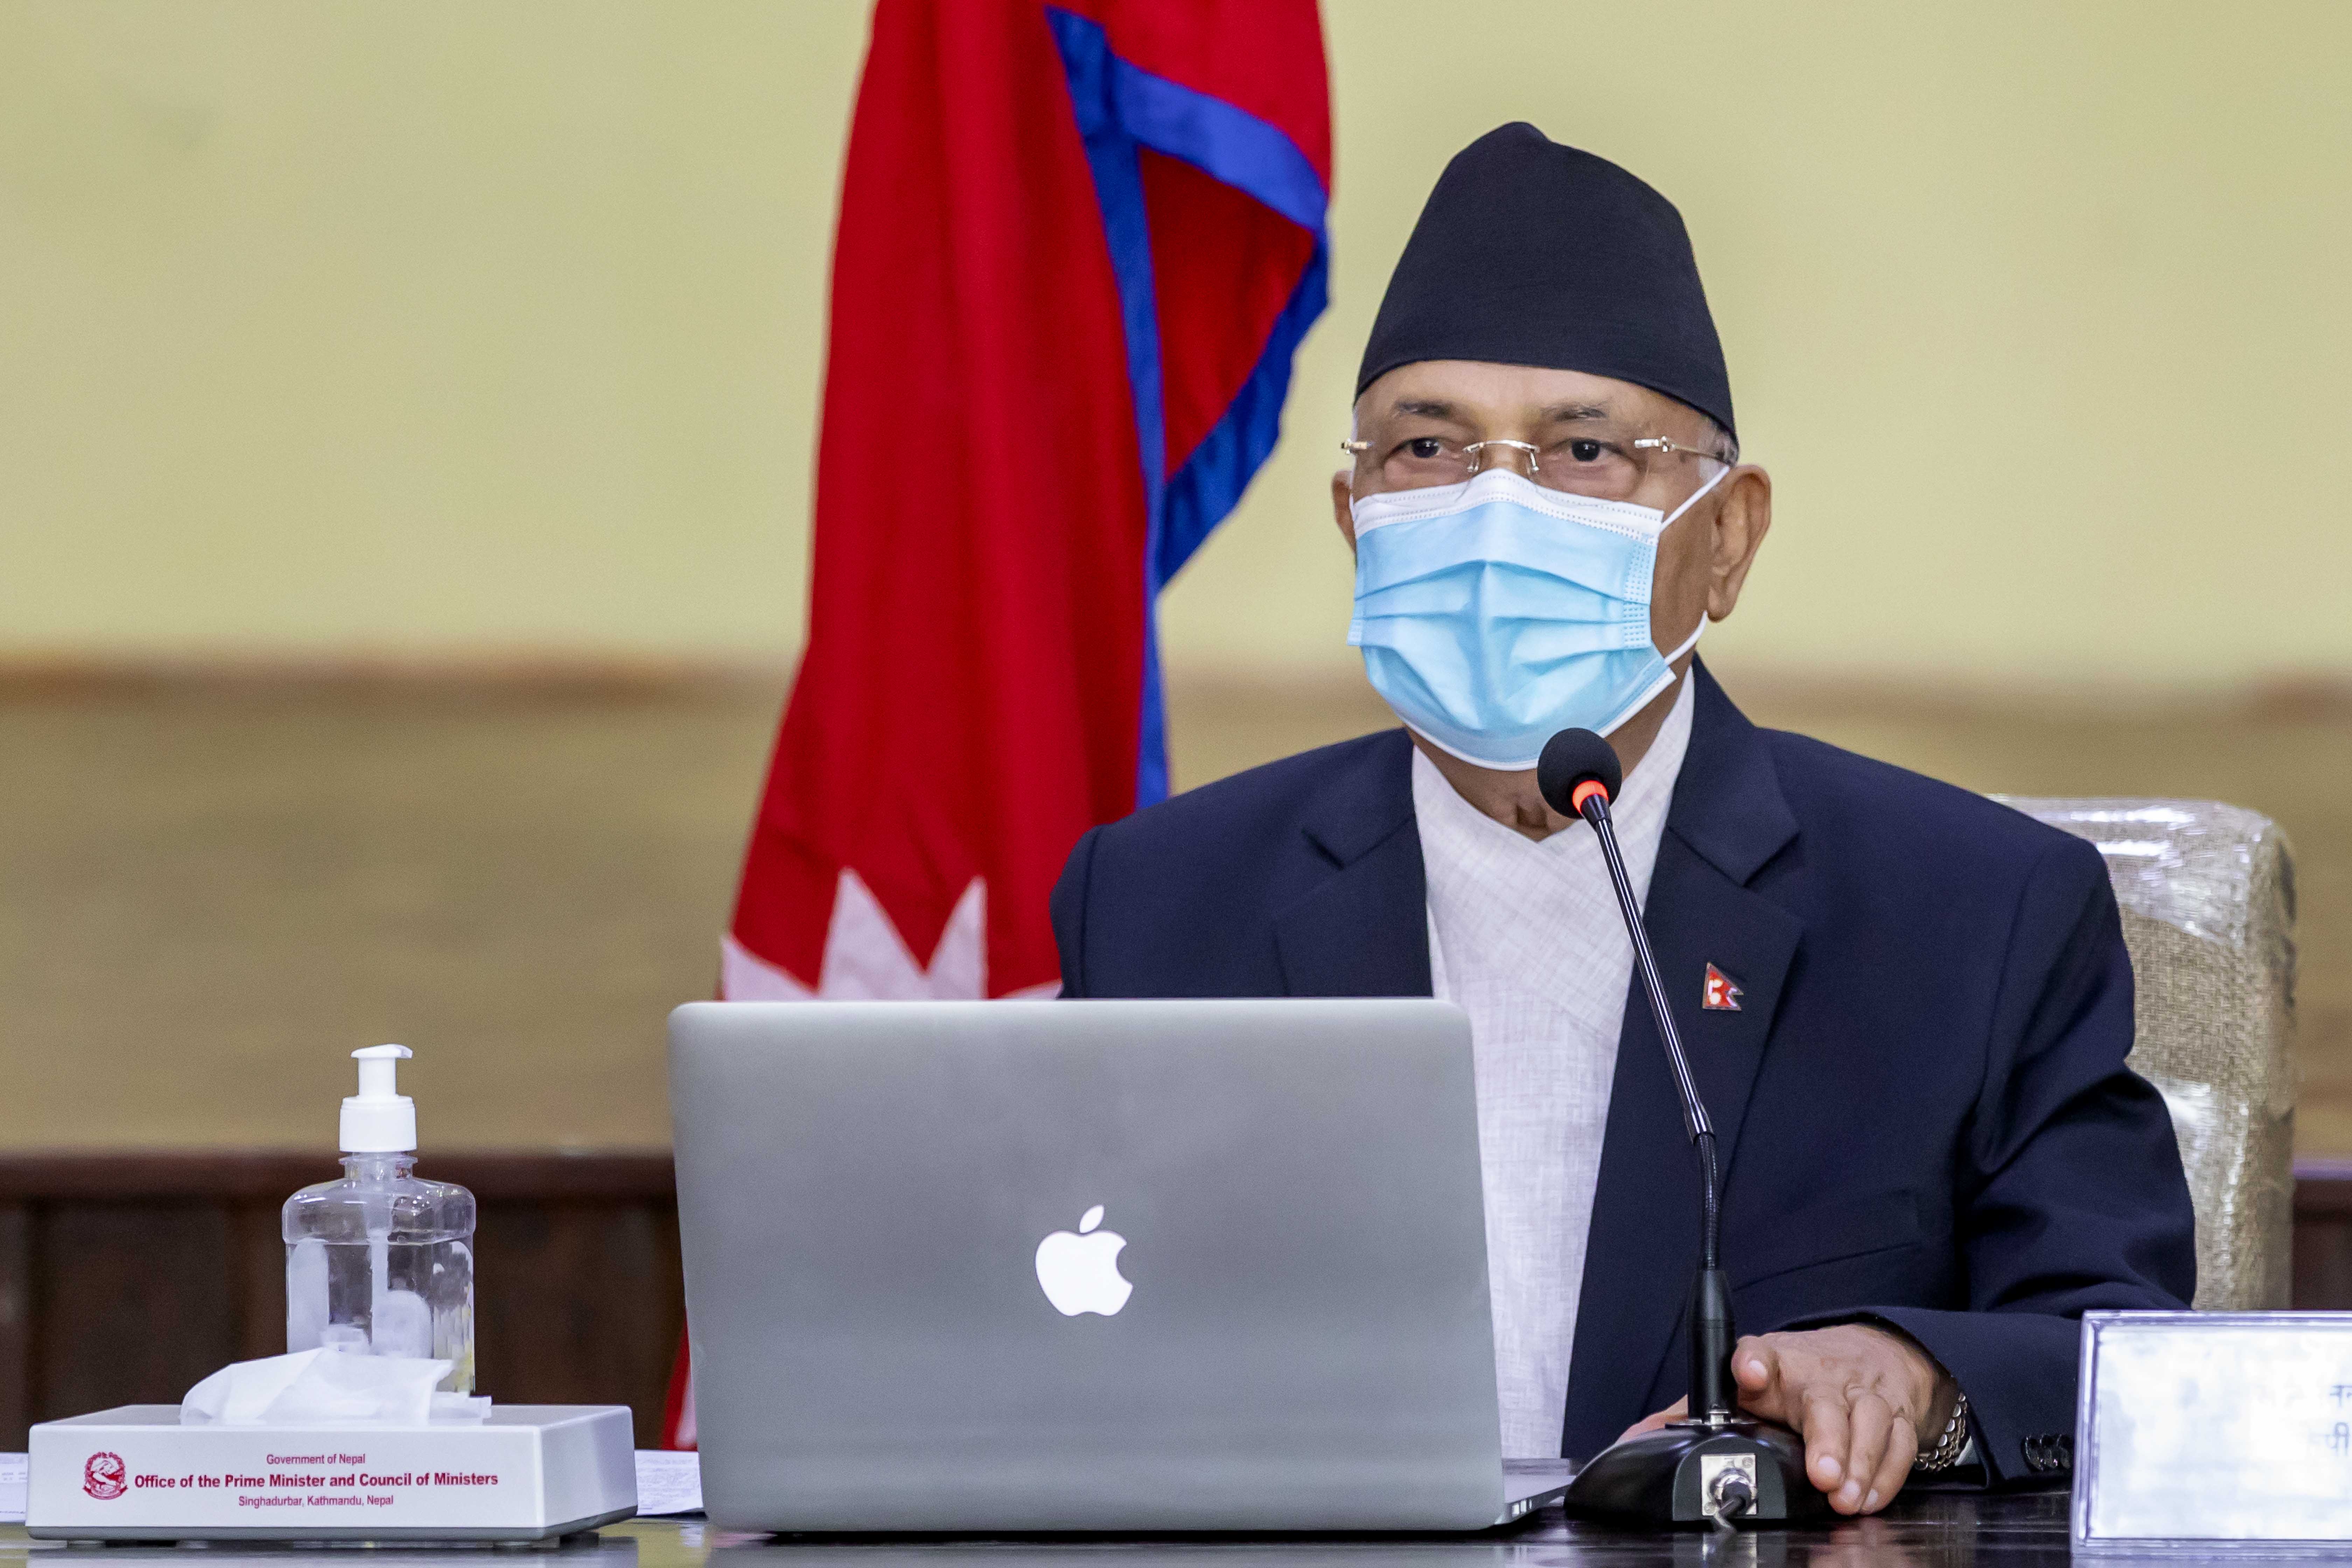 Prime Minister KP Sharma Oli attends the meeting of the Council of Ministers, at PM's official residence, in Baluwatar, Kathmandu, on Monday, July 20, 2020. Photo: Rajan Kafle/PM's Secretariat